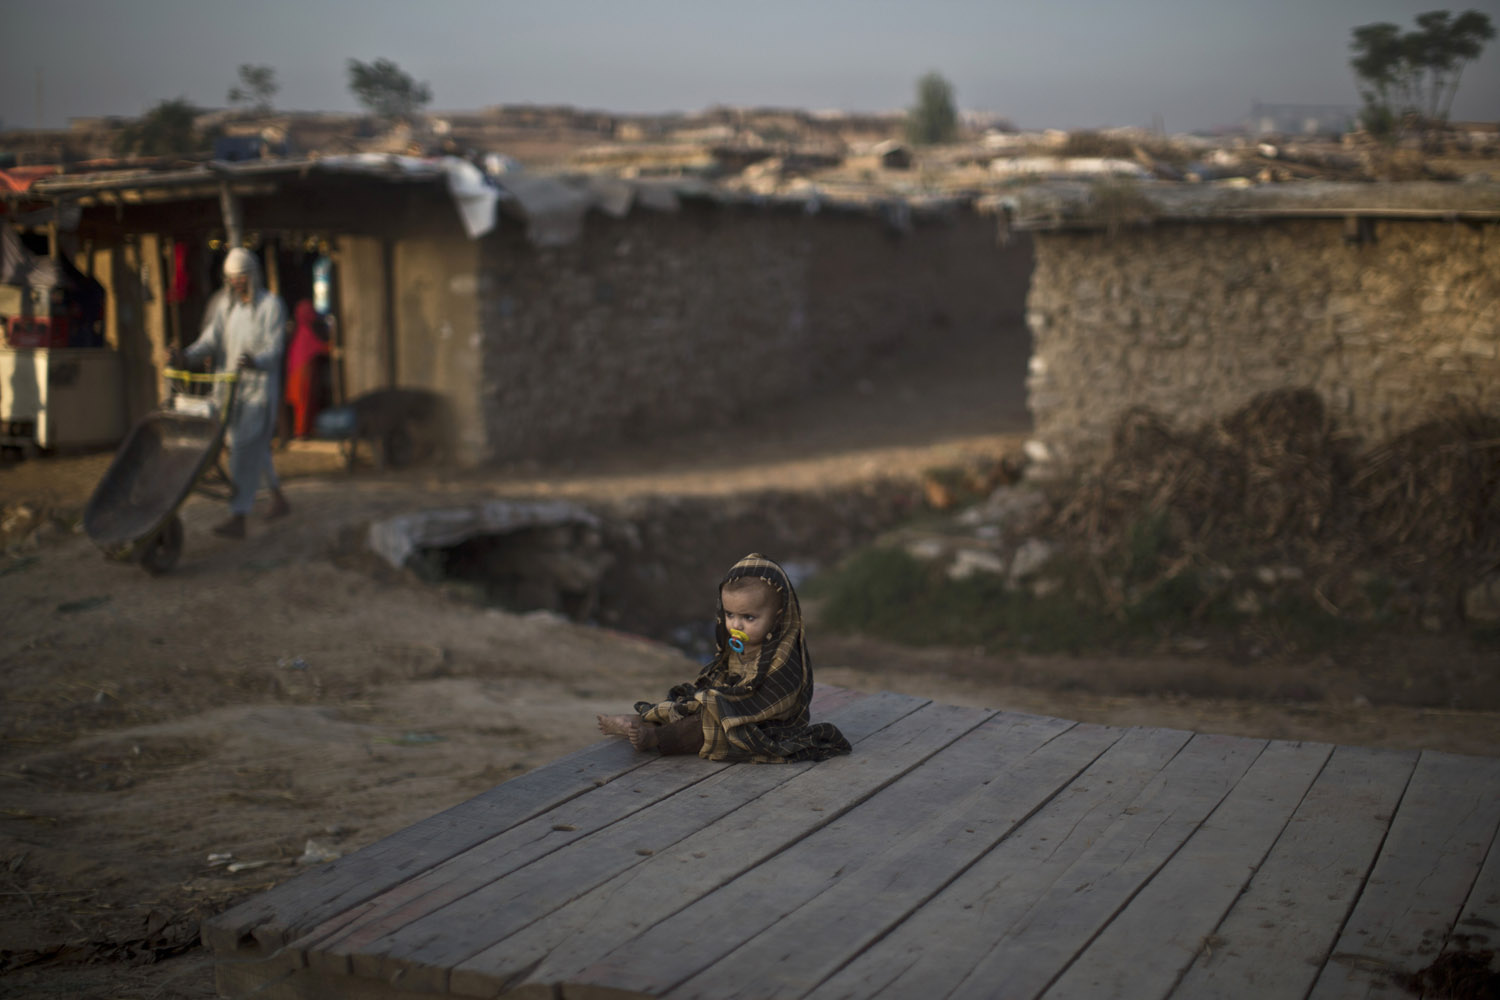 Oct. 14, 2013. An Afghan refugee child sits on roadside in a poor neighborhood on the outskirts of Islamabad.